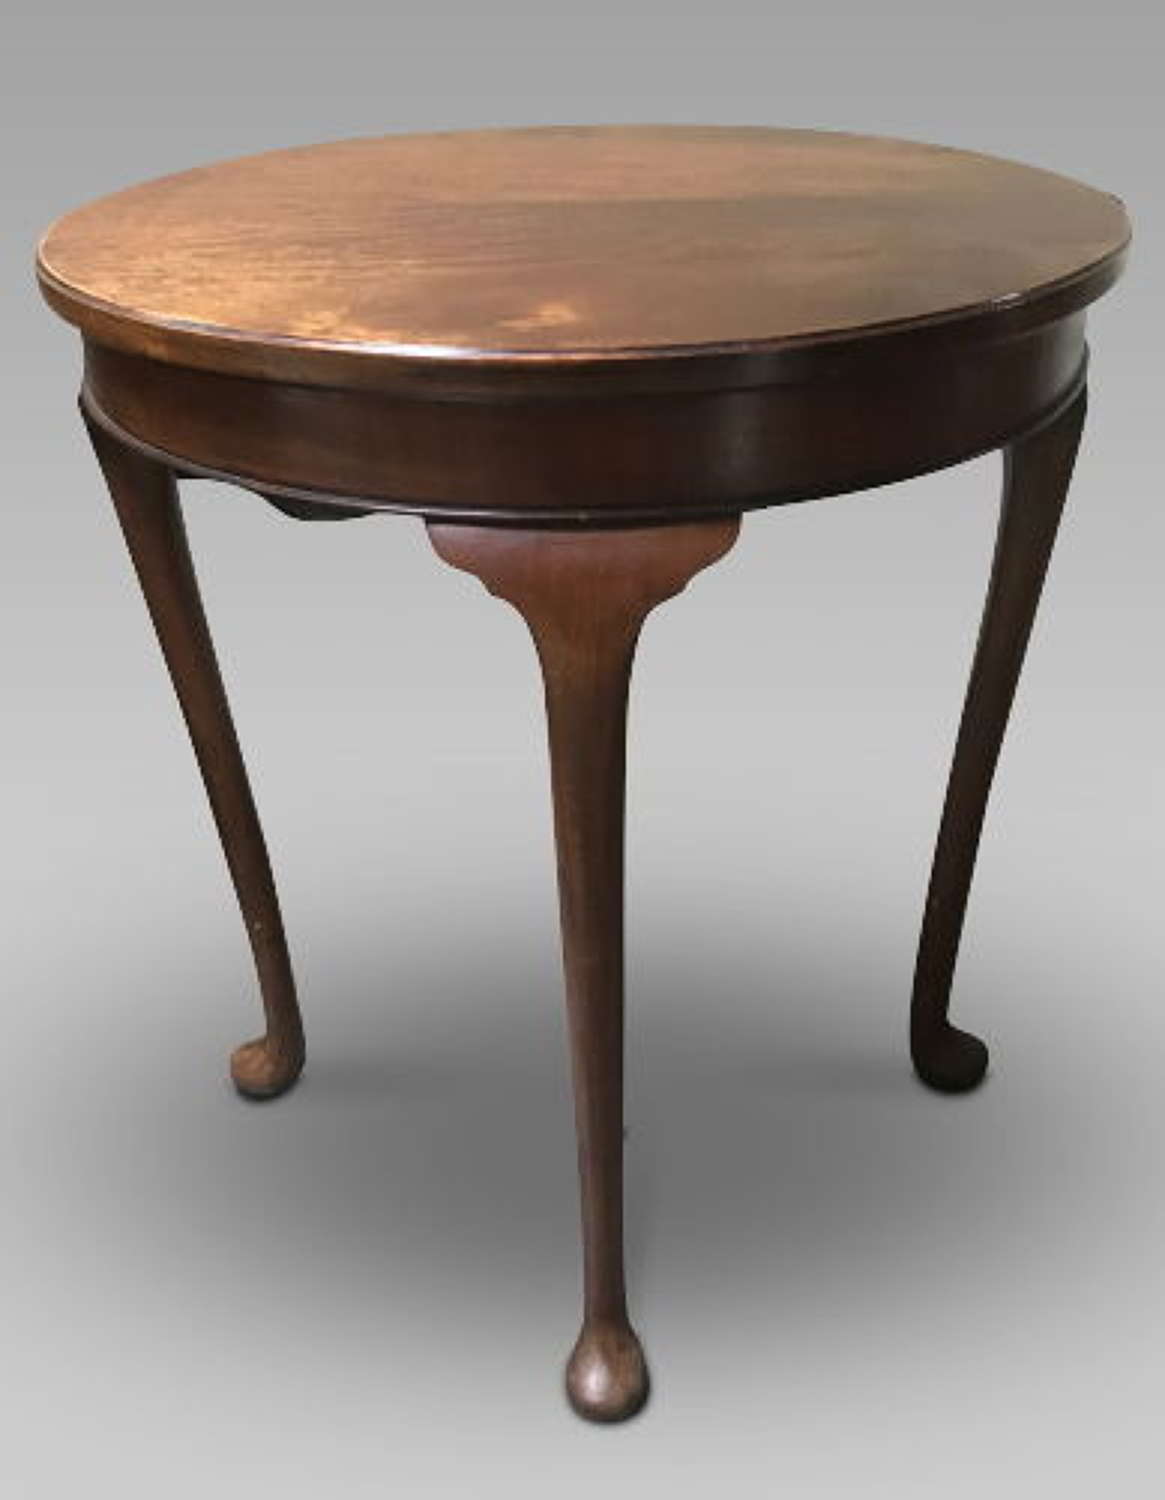 Unusual 19th Century Round Side Table / Card Table